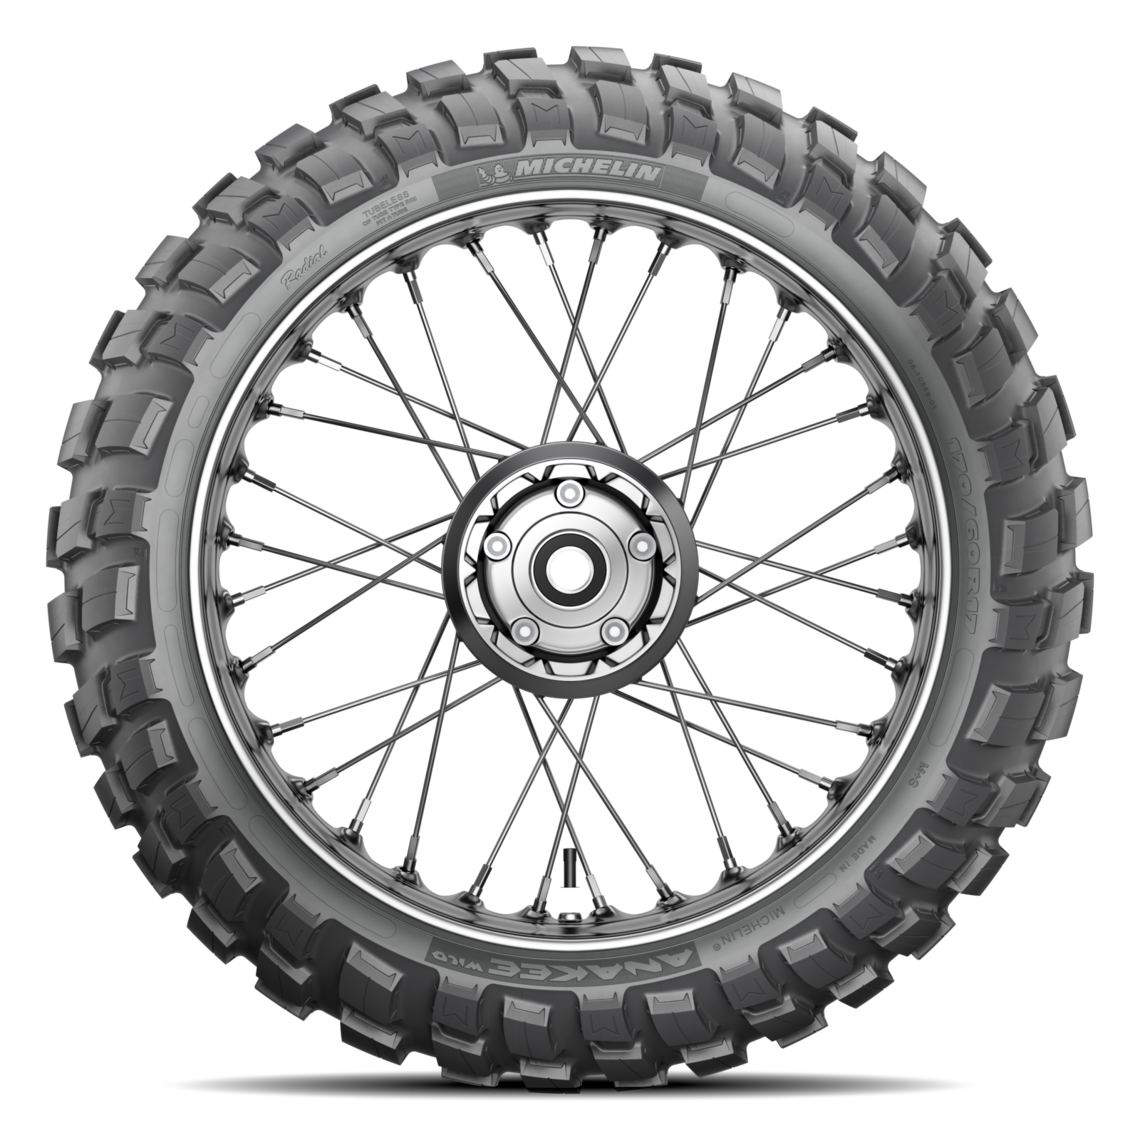 MICHELIN Anakee Wild Dual-Sport Radial Tire-150/70R-17 69R 